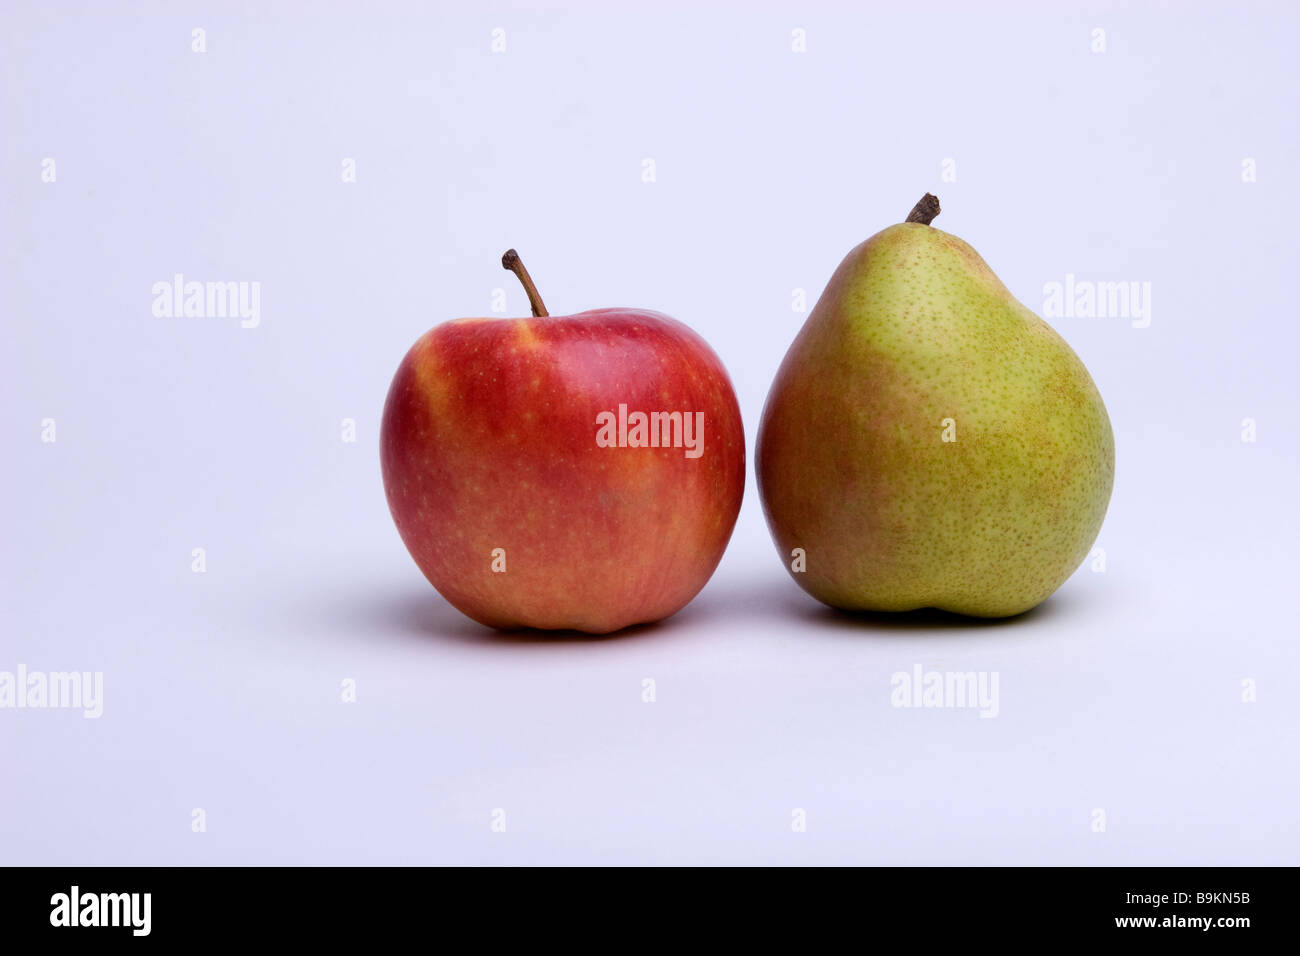 Red apple and green pear still life Stock Photo